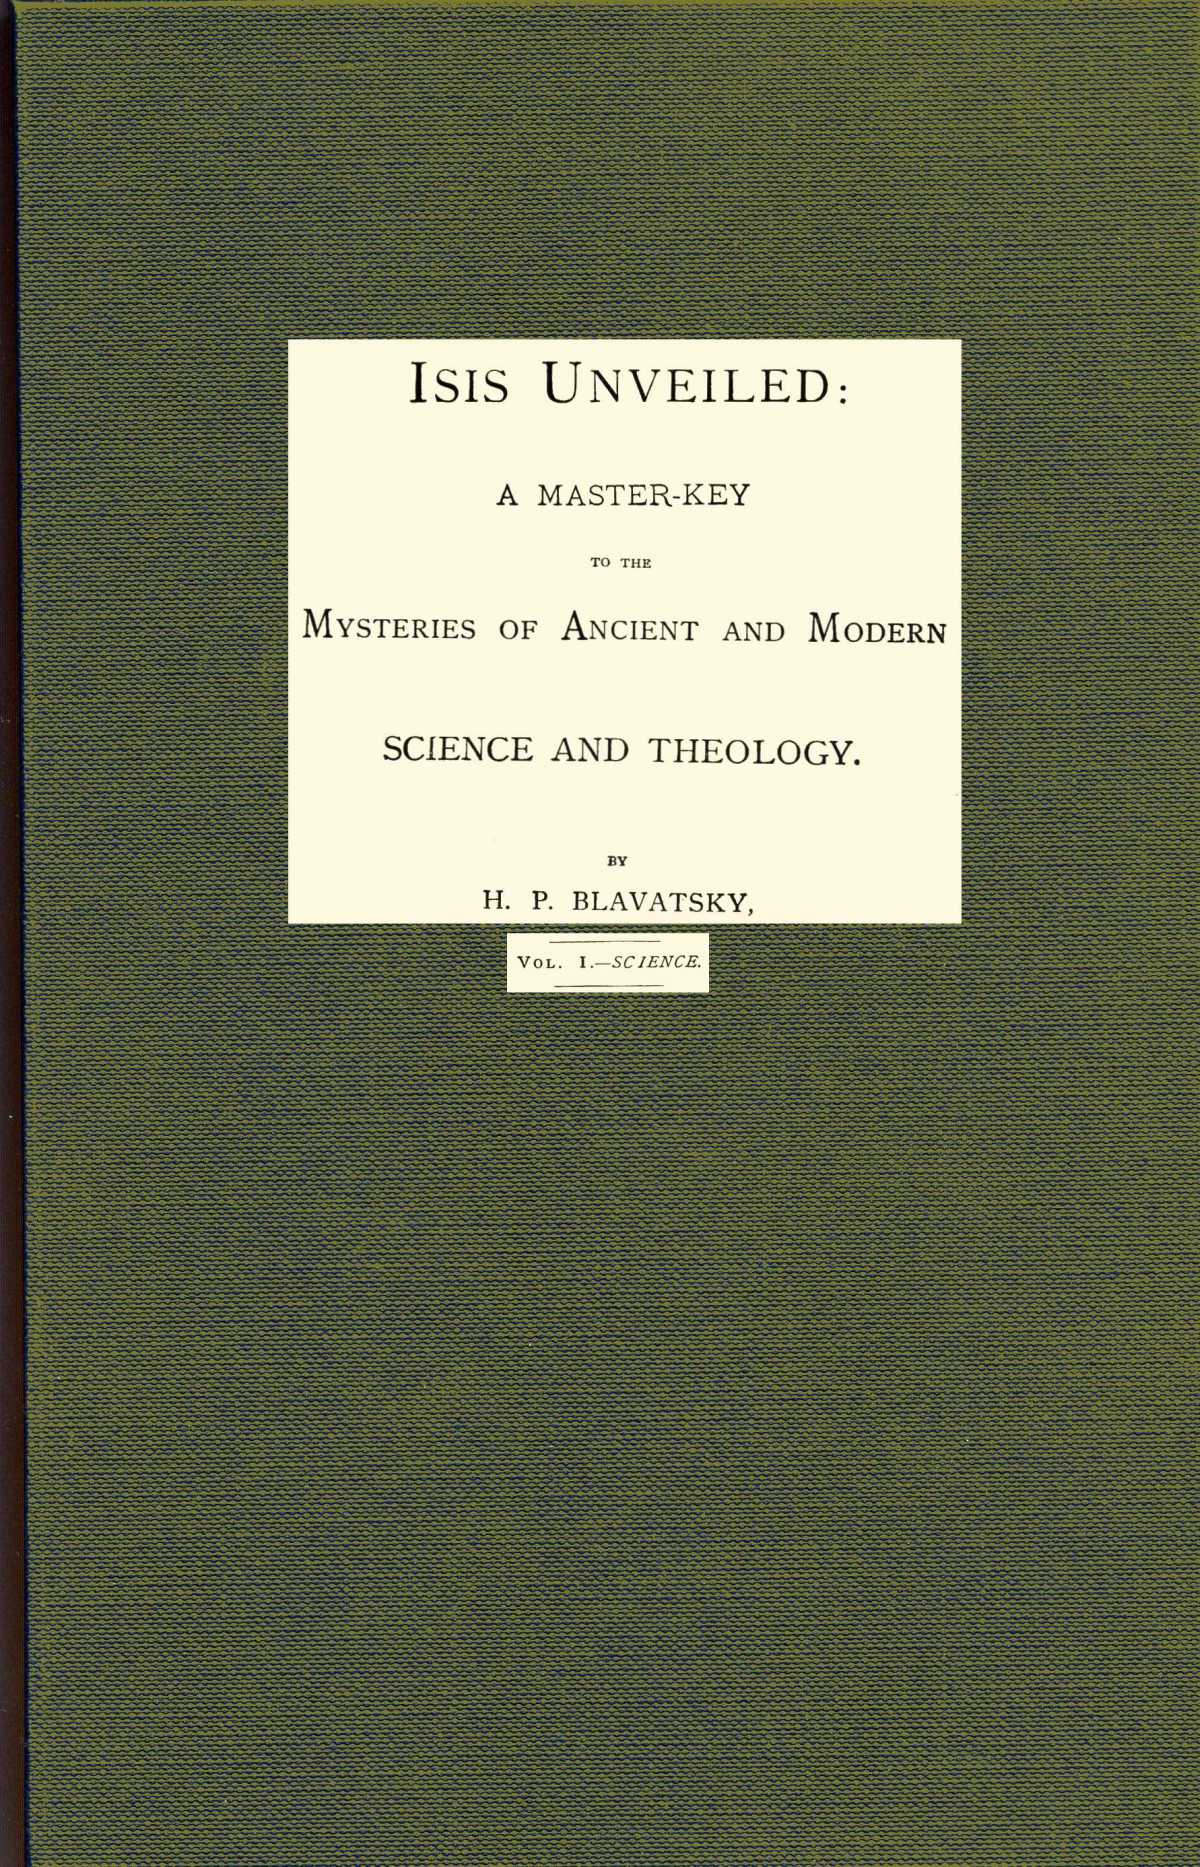 Isis unveiled, Volume 1 (of 2), Science&#10;A master-key to mysteries of ancient and modern science and theology